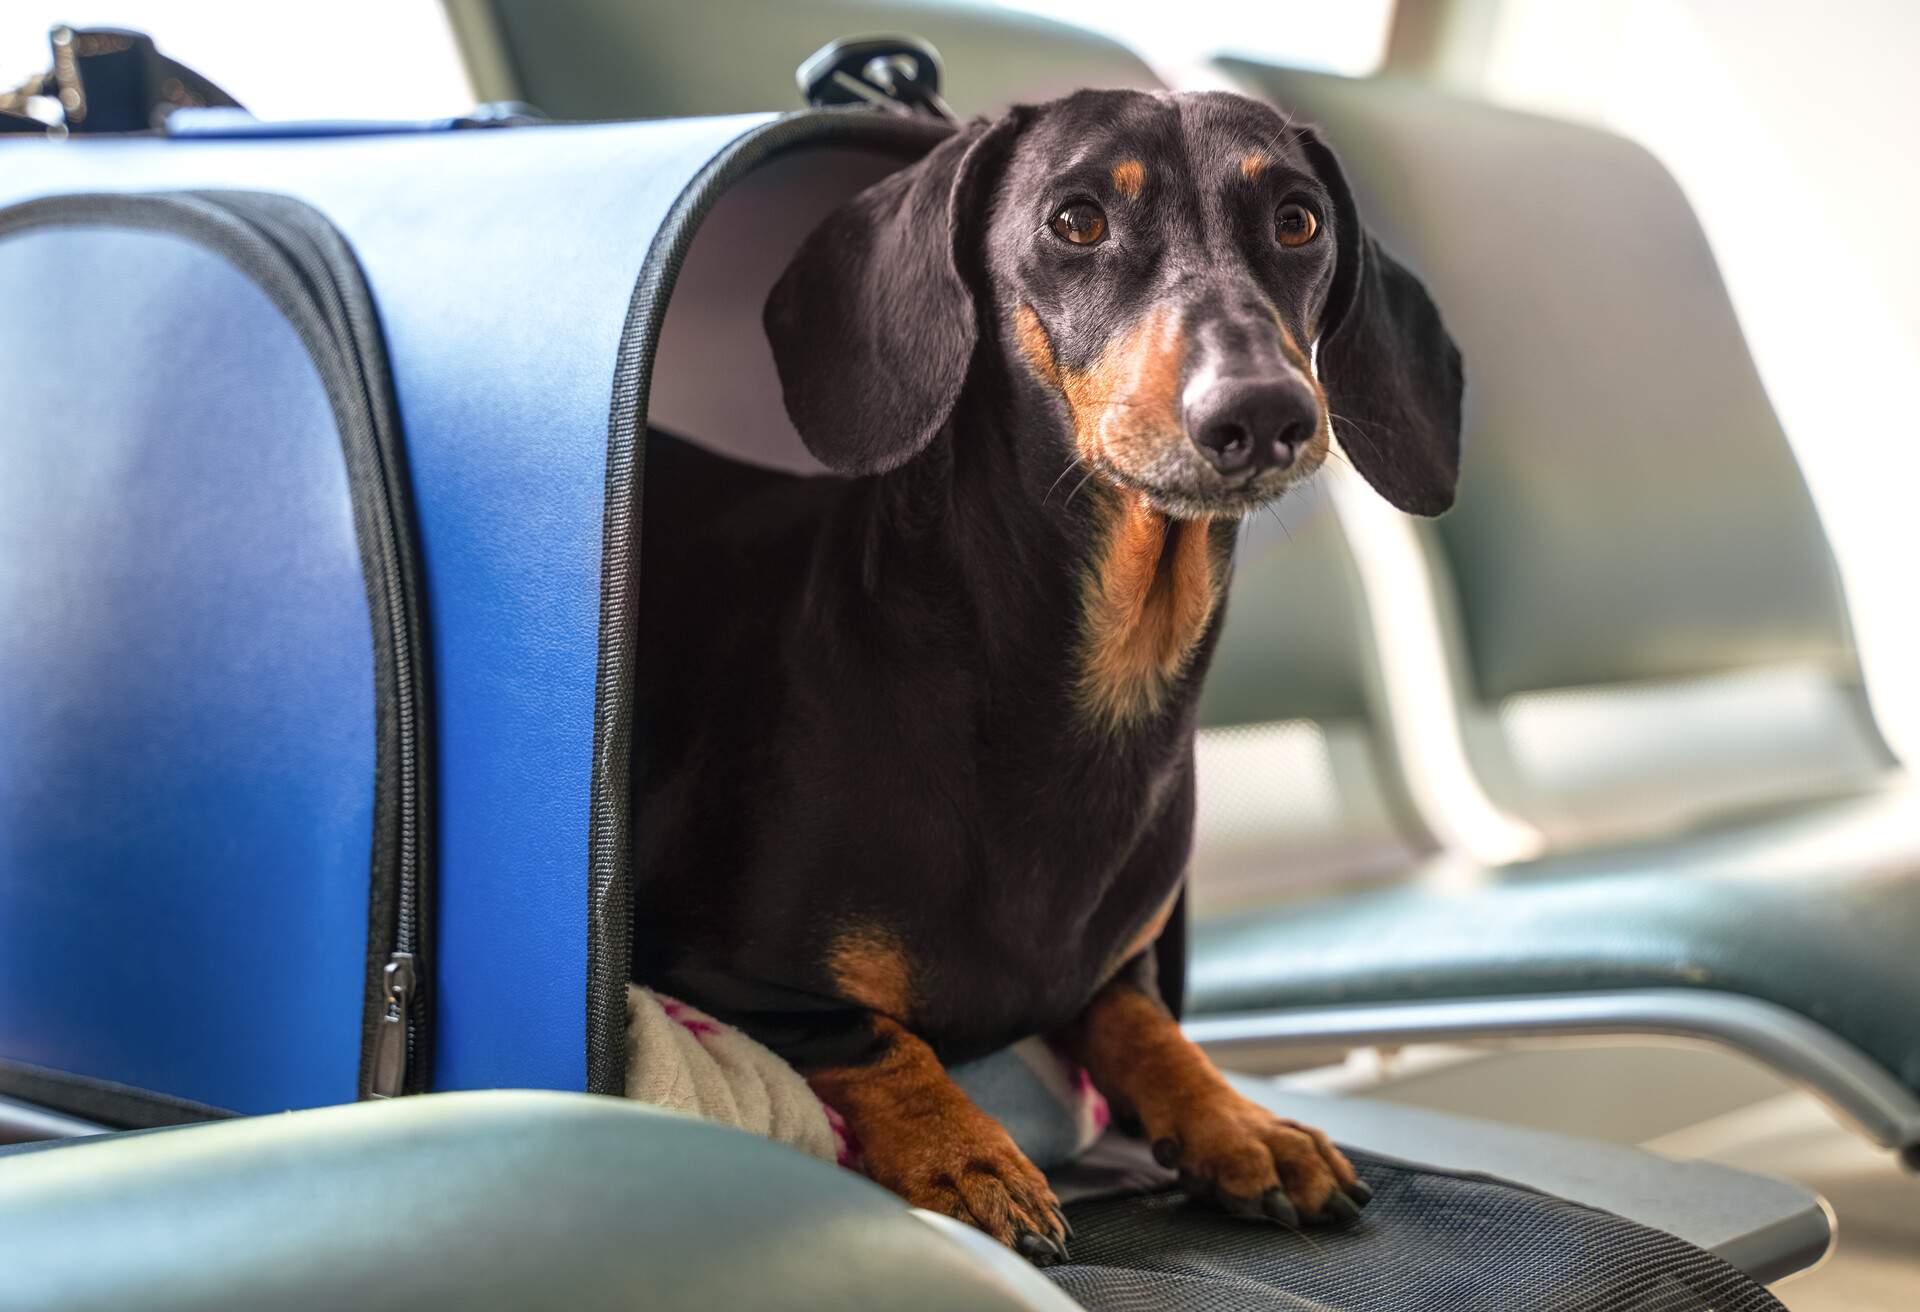 Cute little dachshund peeking out from special dog carry bag in airport or railway station. Row of empty seats on background. Travelling with pets concept.